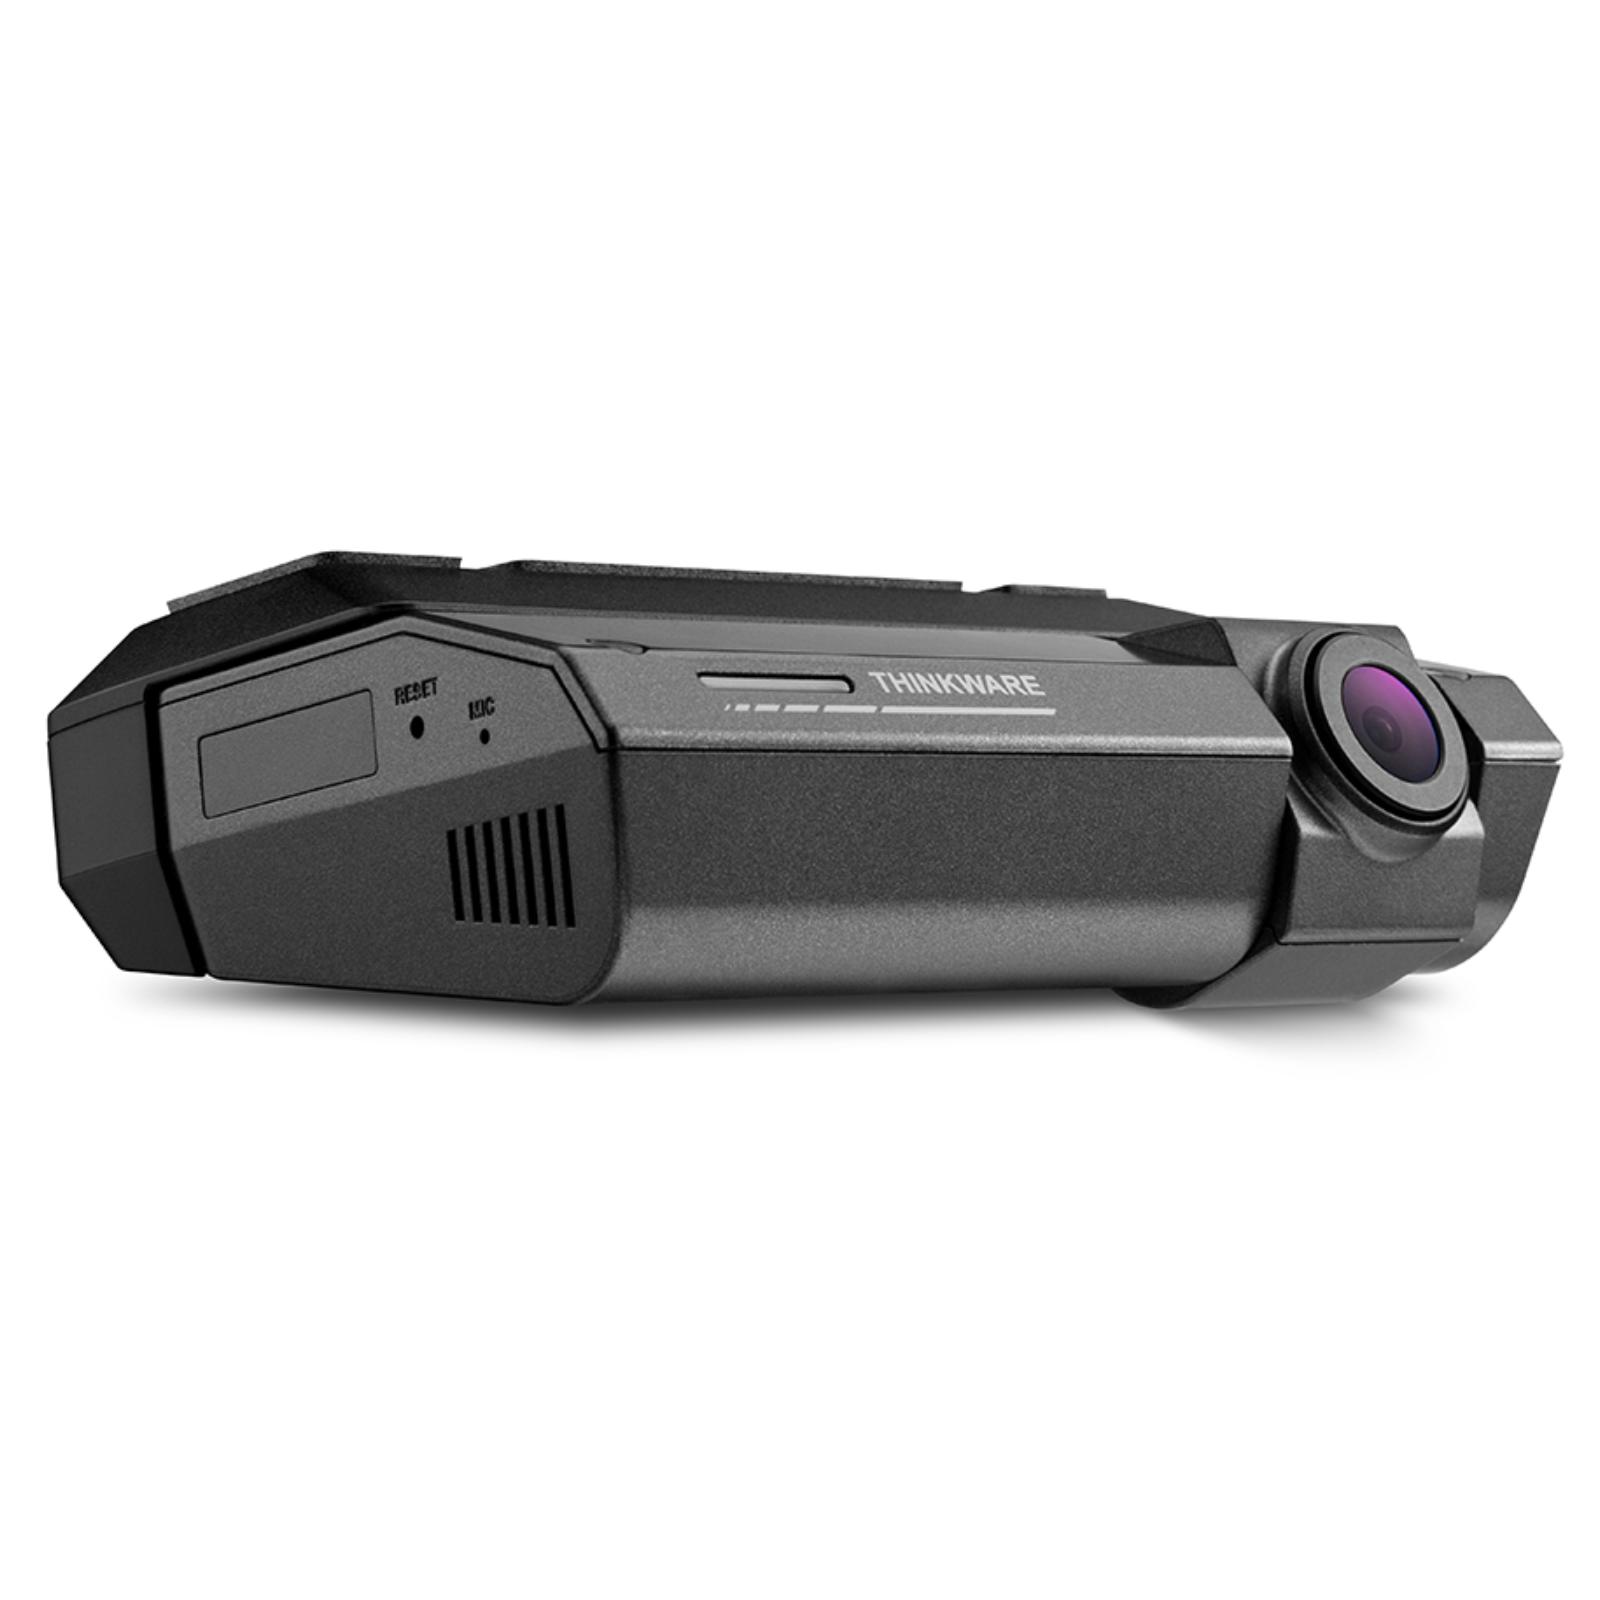 Thinkware Dash Cam F790 Pro Fit front